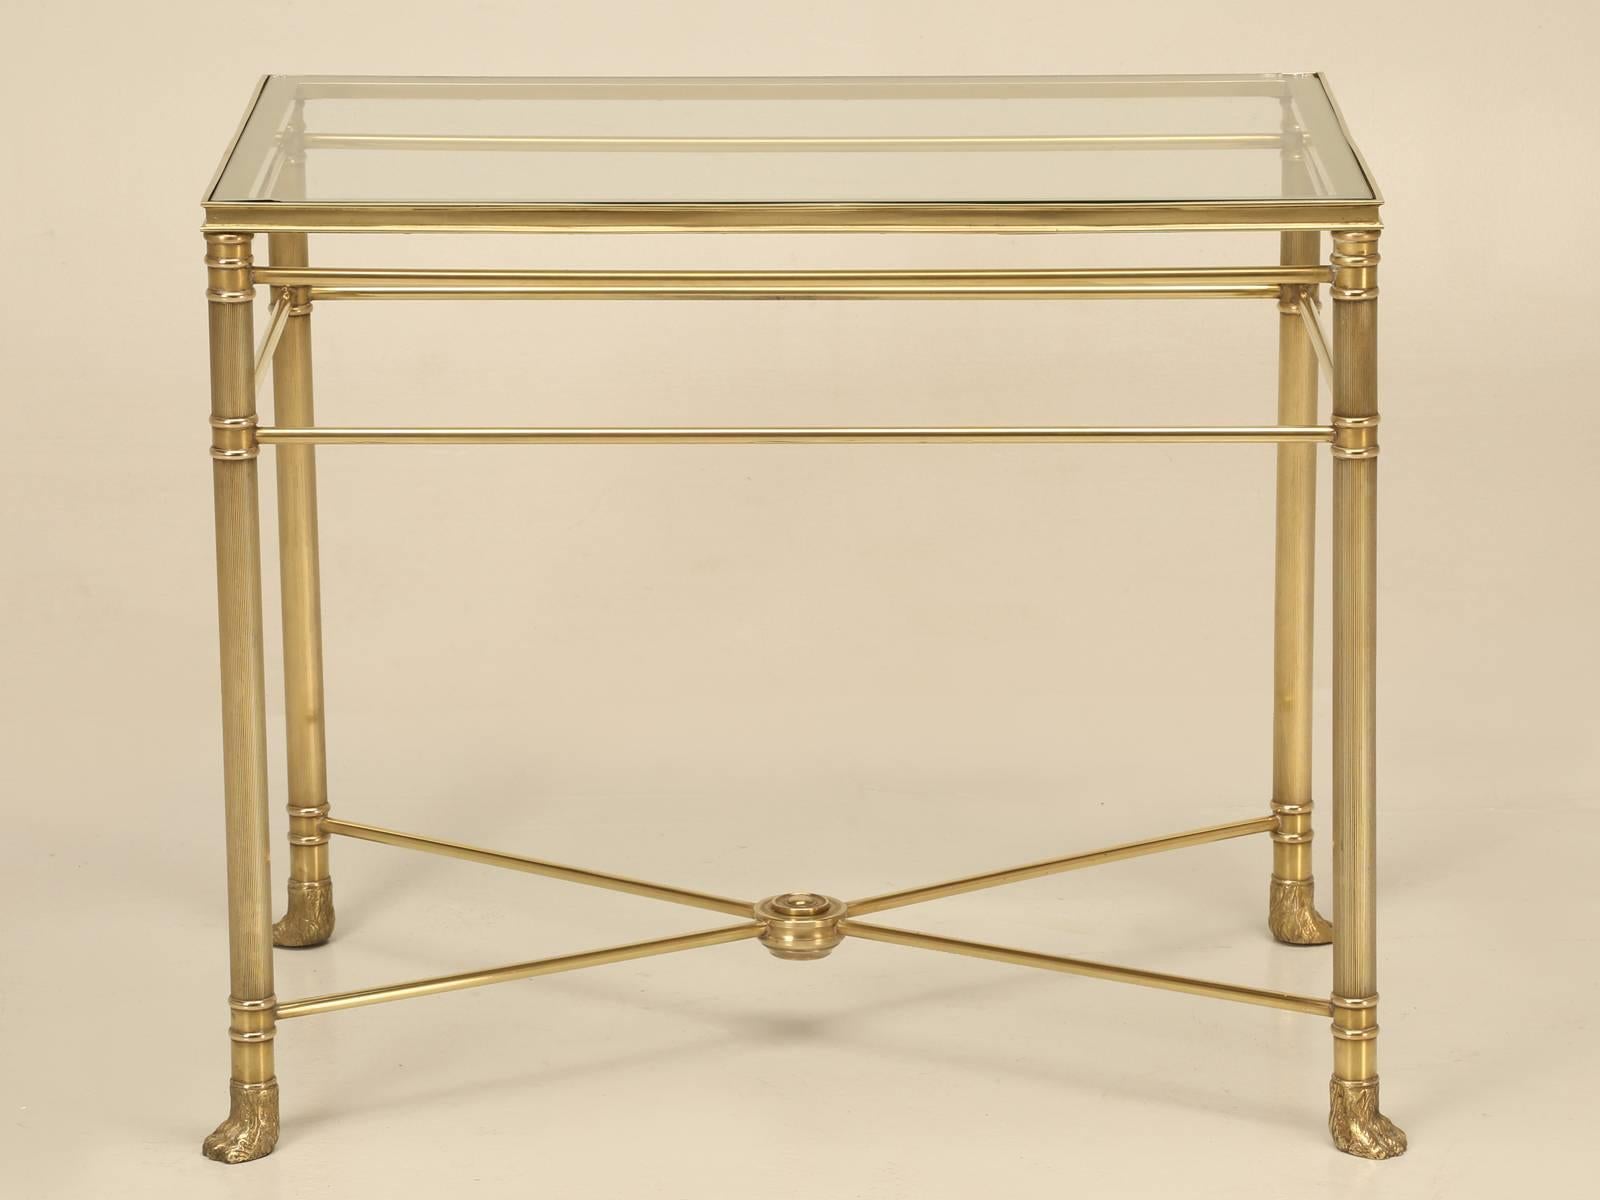 Elegant vintage French solid brass Mid-Century Modern end table with a glass top. Polished un-lacquered brass that will oxidize over time, unless you would like us to re-lacquer the brass for you?  **Please note that the glass top has two damaged